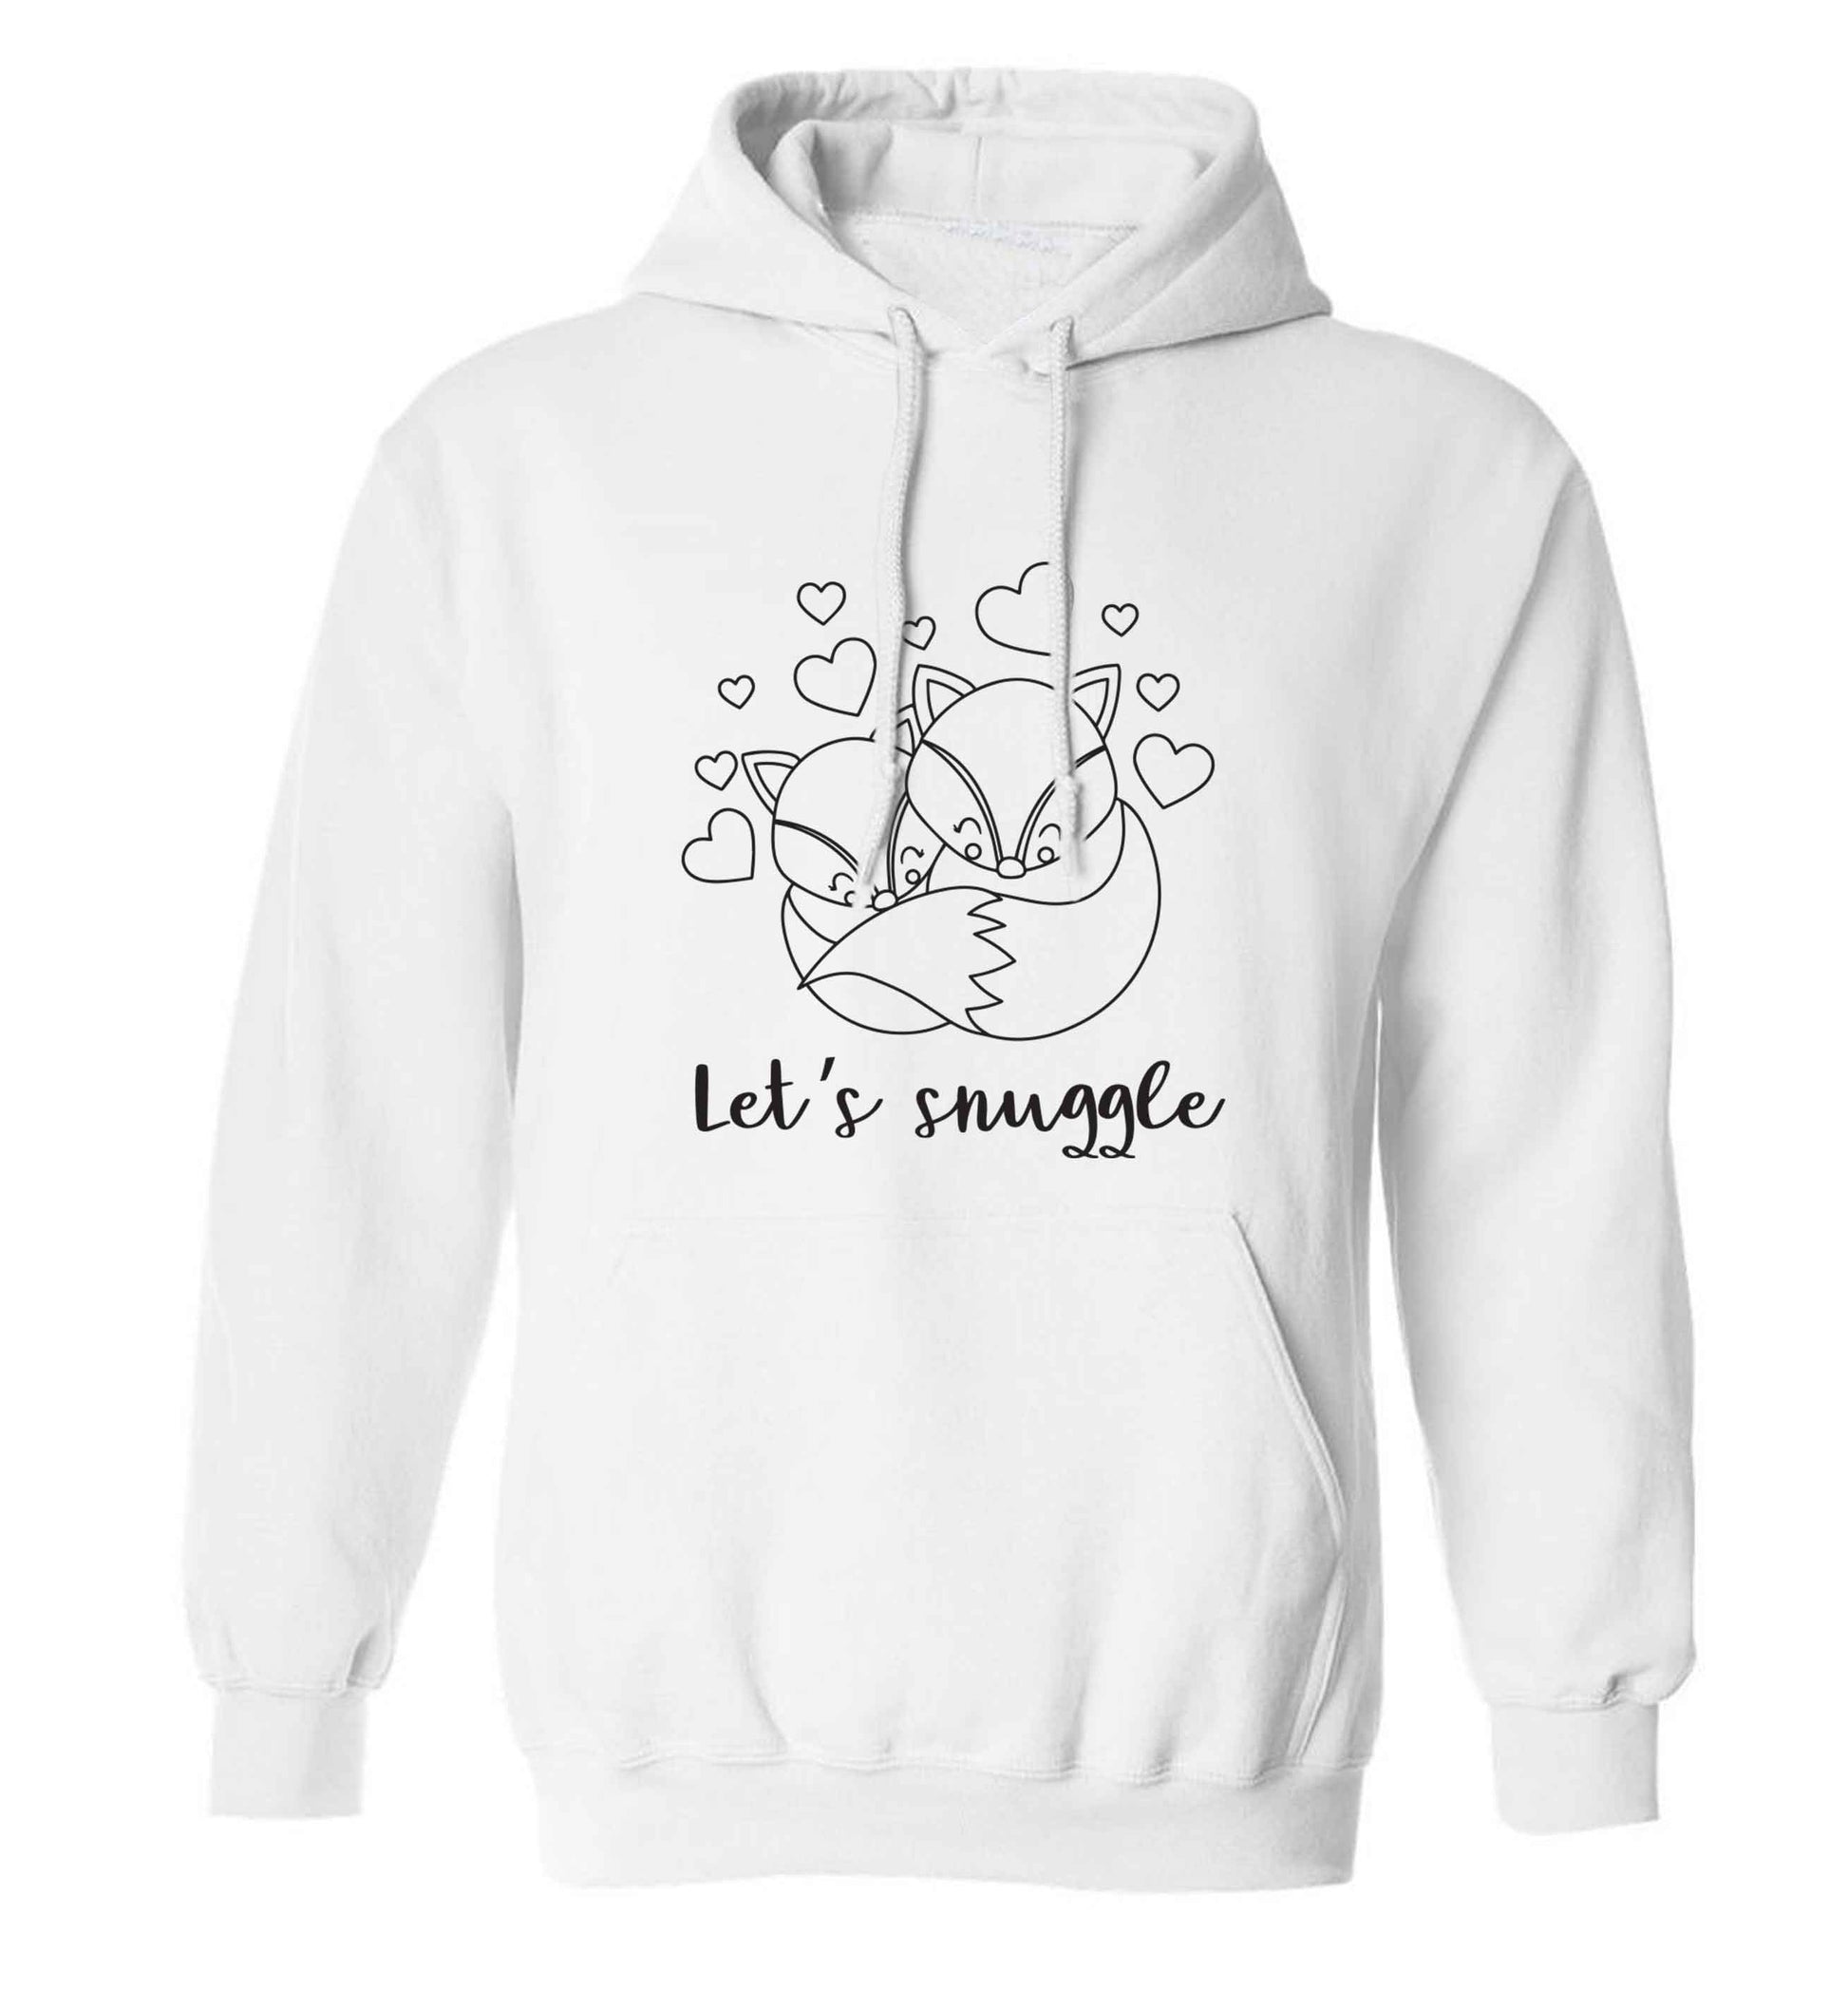 Let's snuggle adults unisex white hoodie 2XL